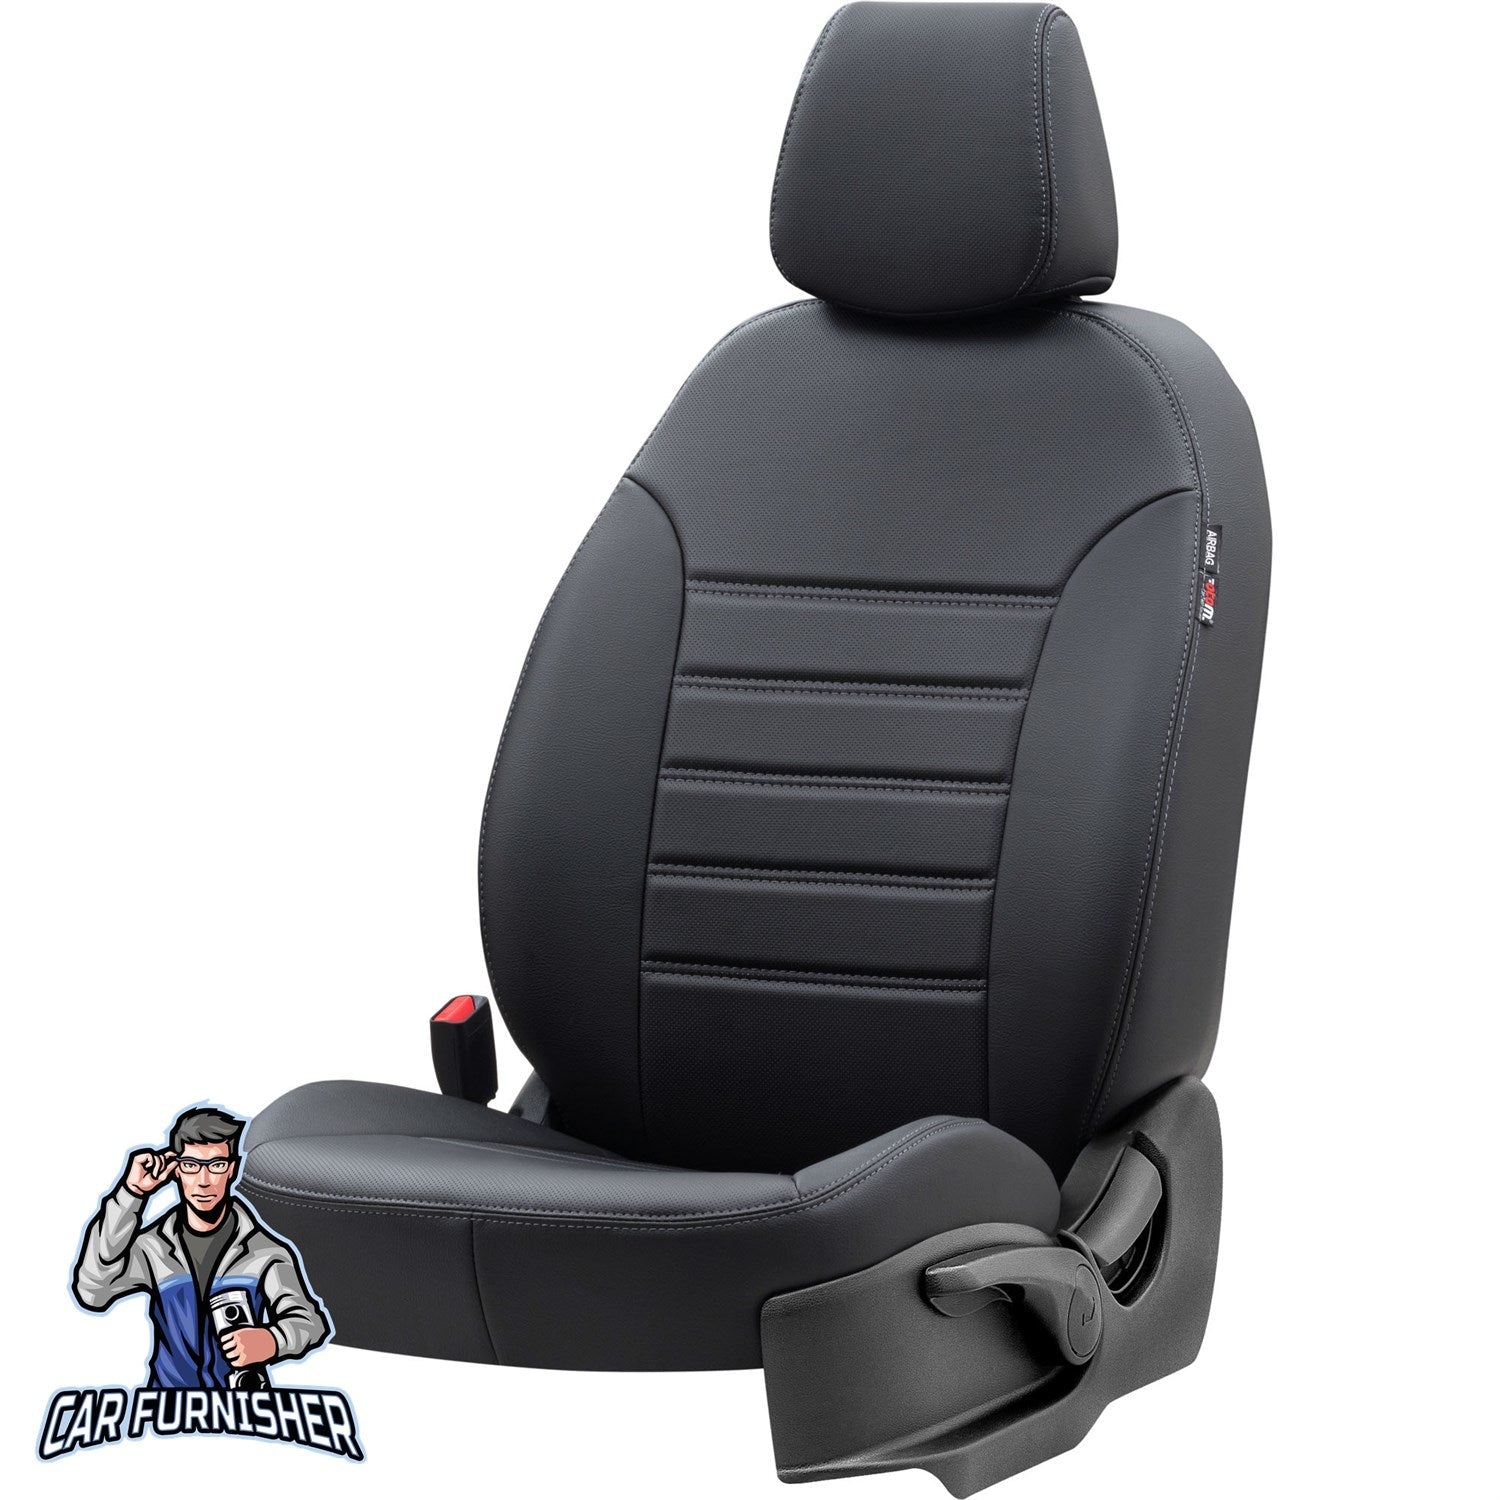 Volvo S40 Seat Cover Istanbul Leather Design Black Leather